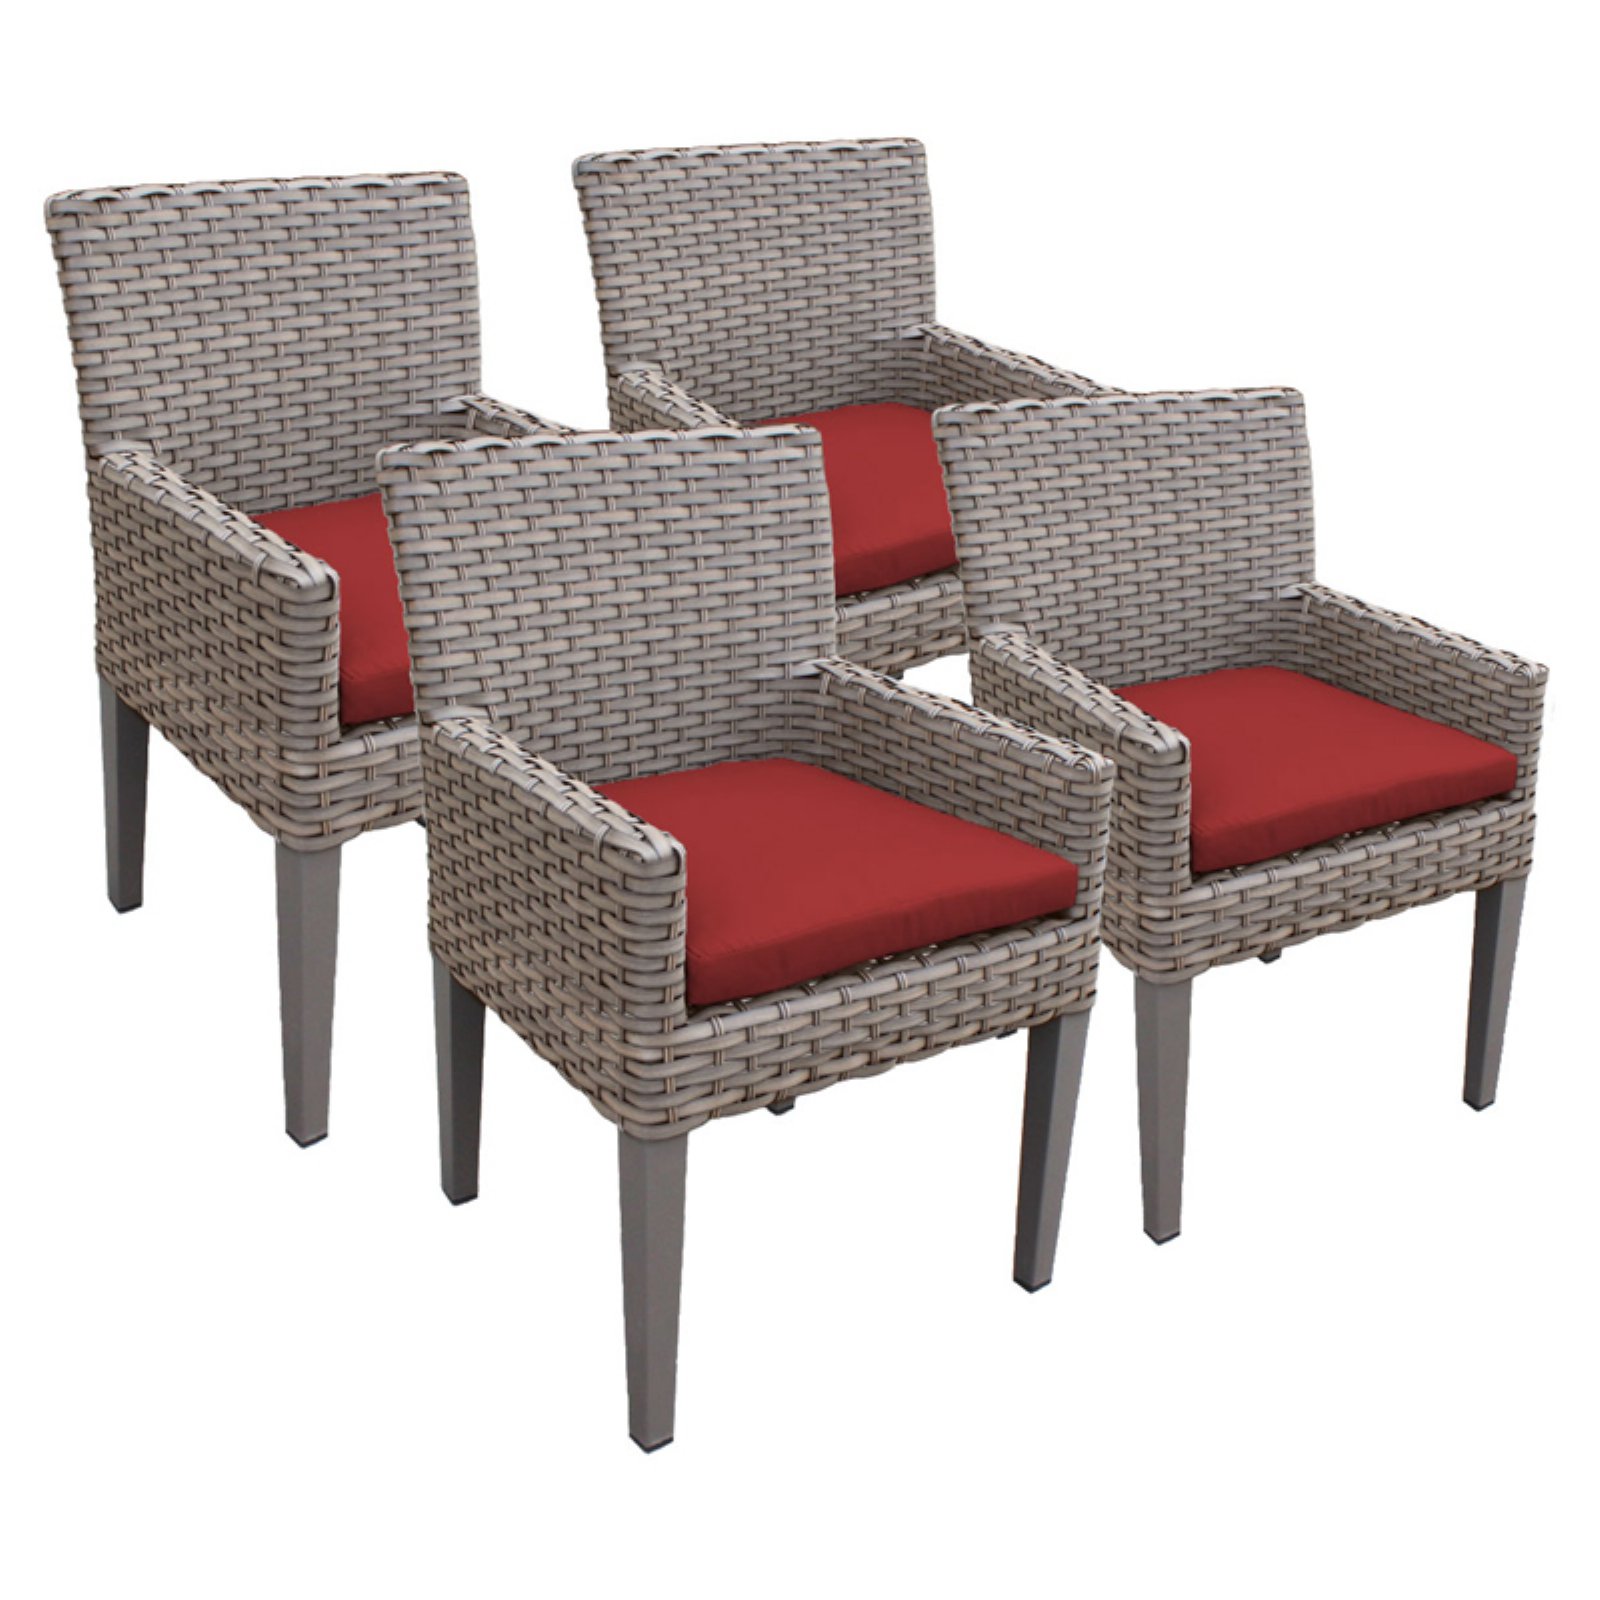 2 Oasis Dining Chairs With Arms in Aruba - image 2 of 2